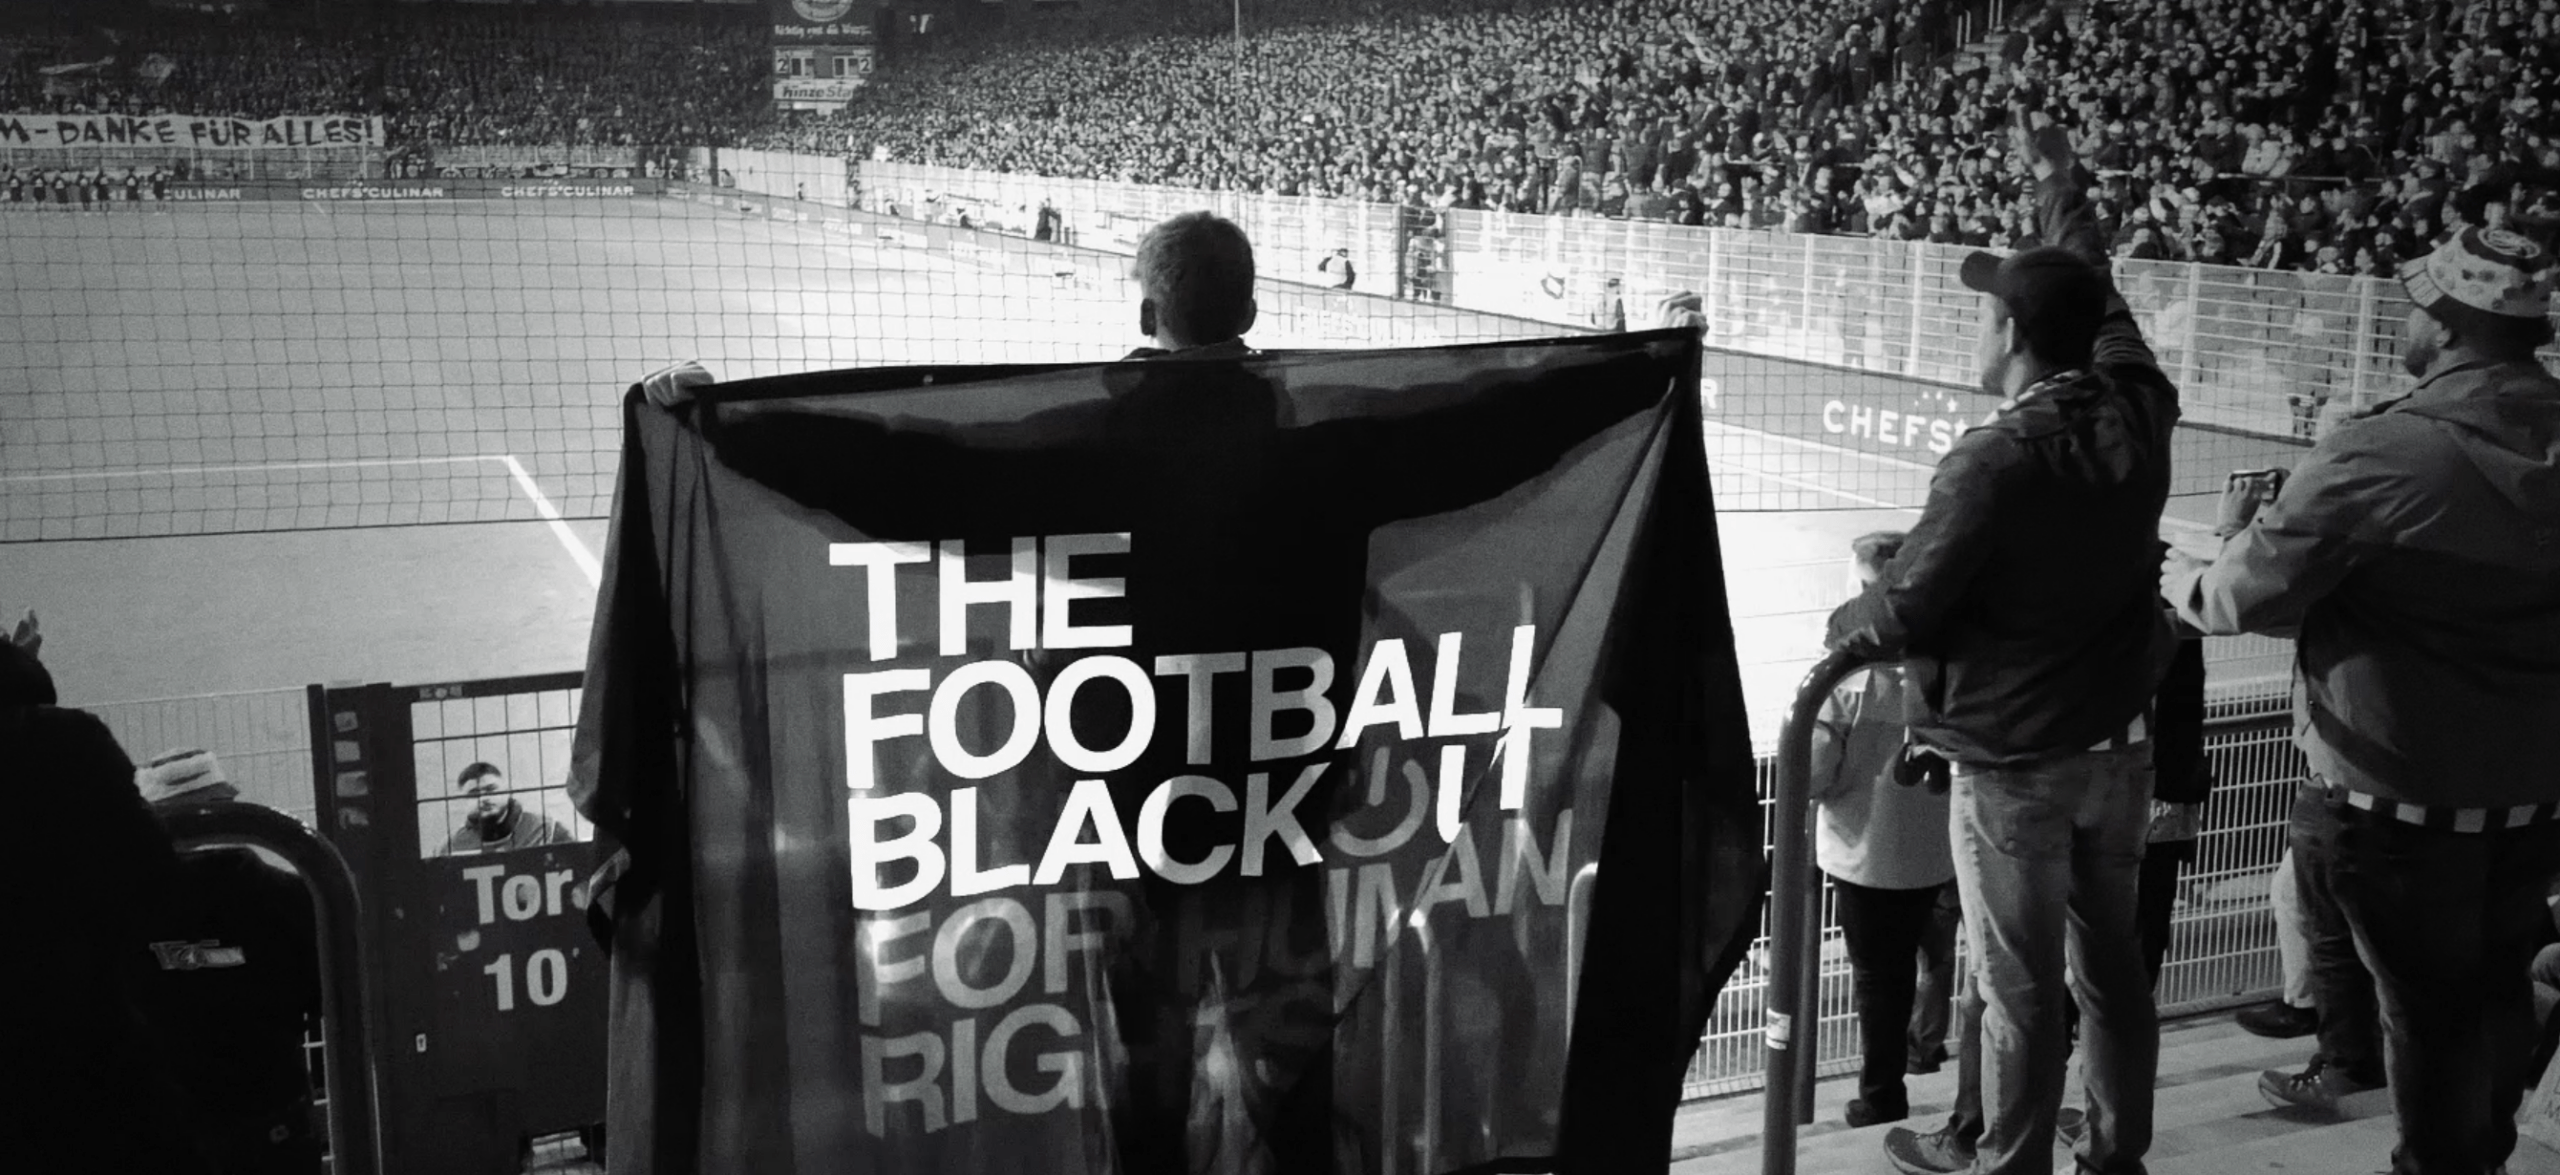 Man wearing flag at football game that reads "The Football Blackout For Human Rights"